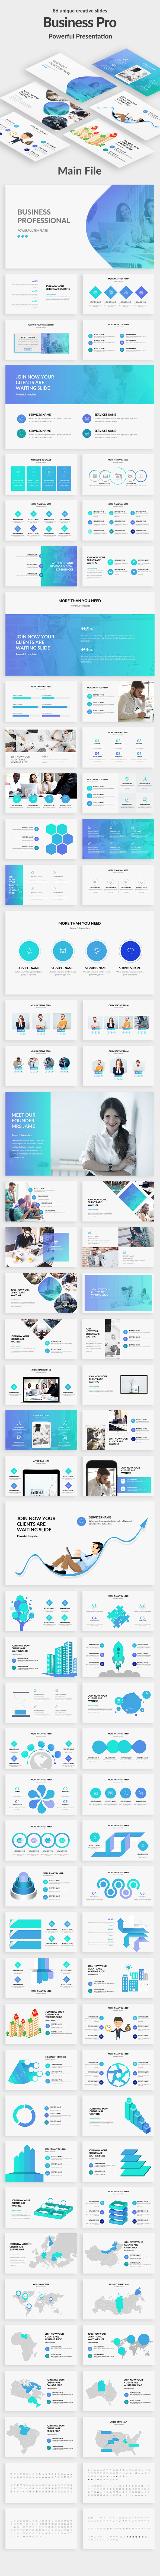 Business Professional Powerpoint Template